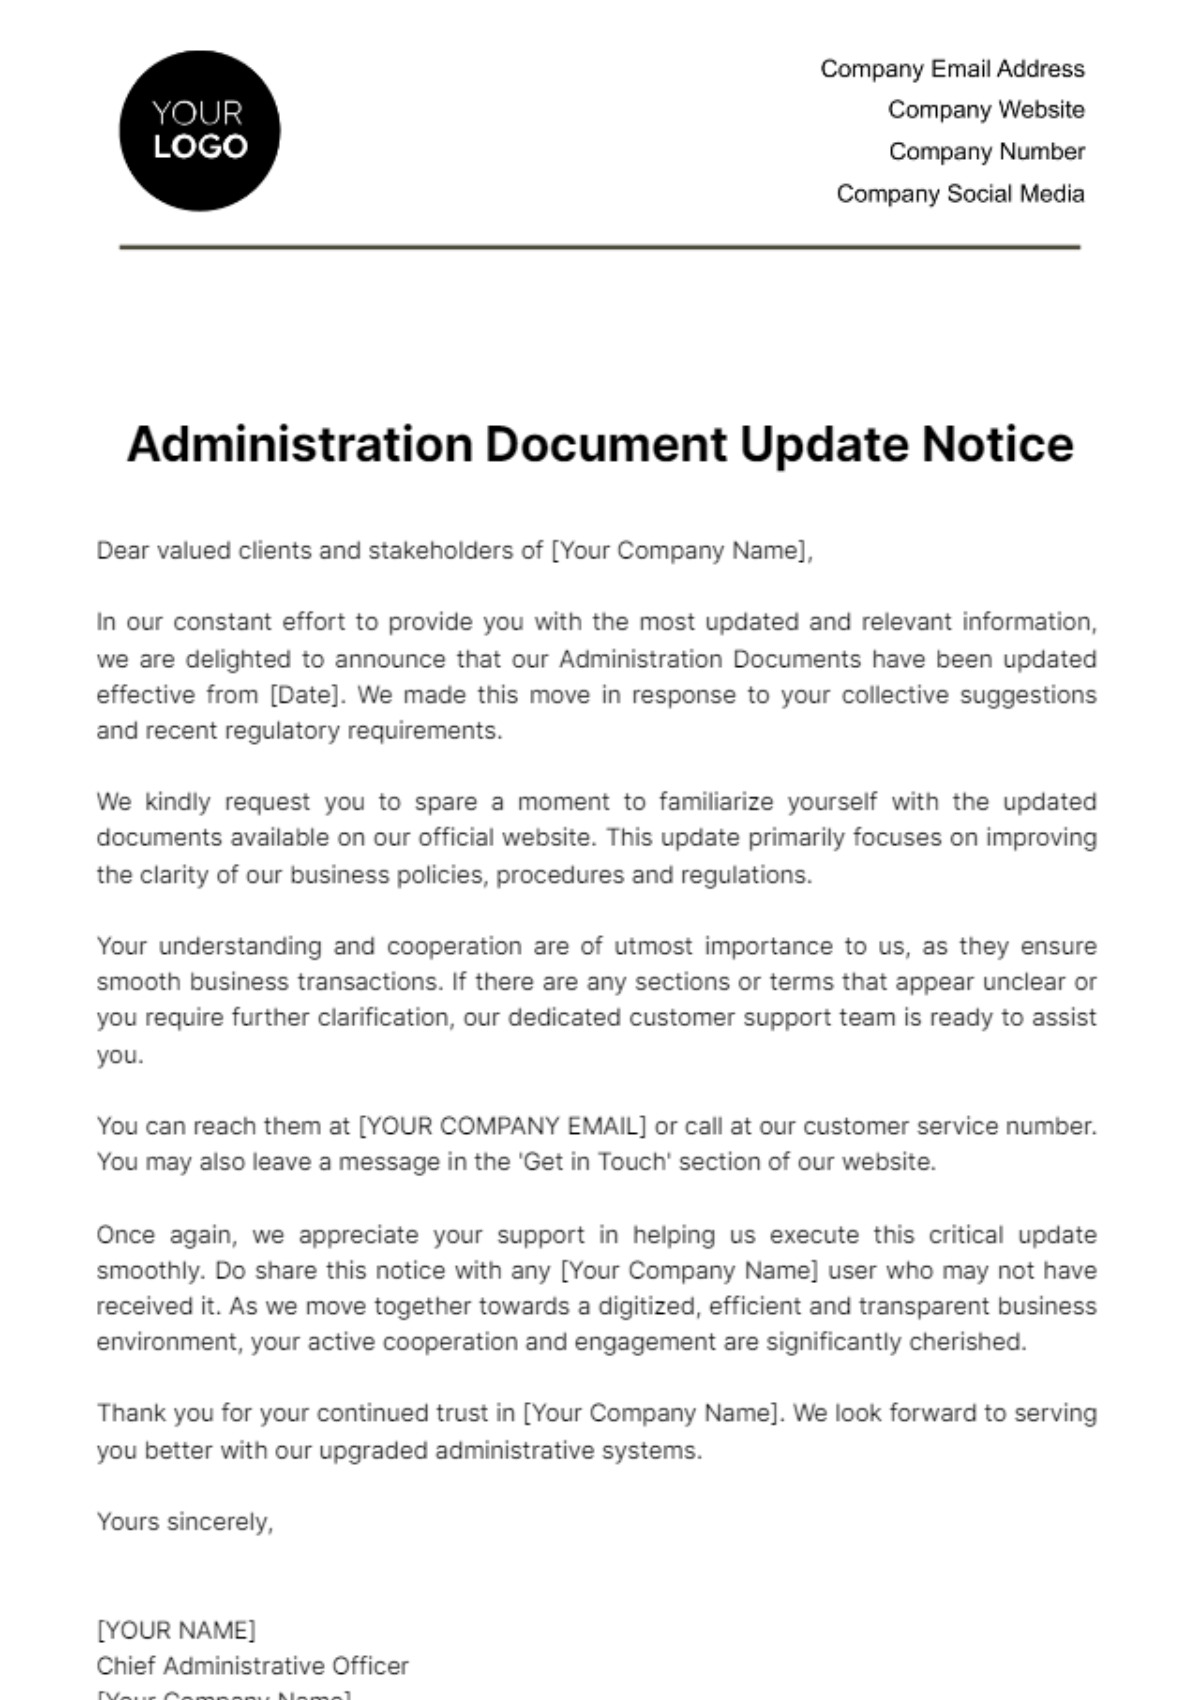 Free Administration Document Update Notice Template